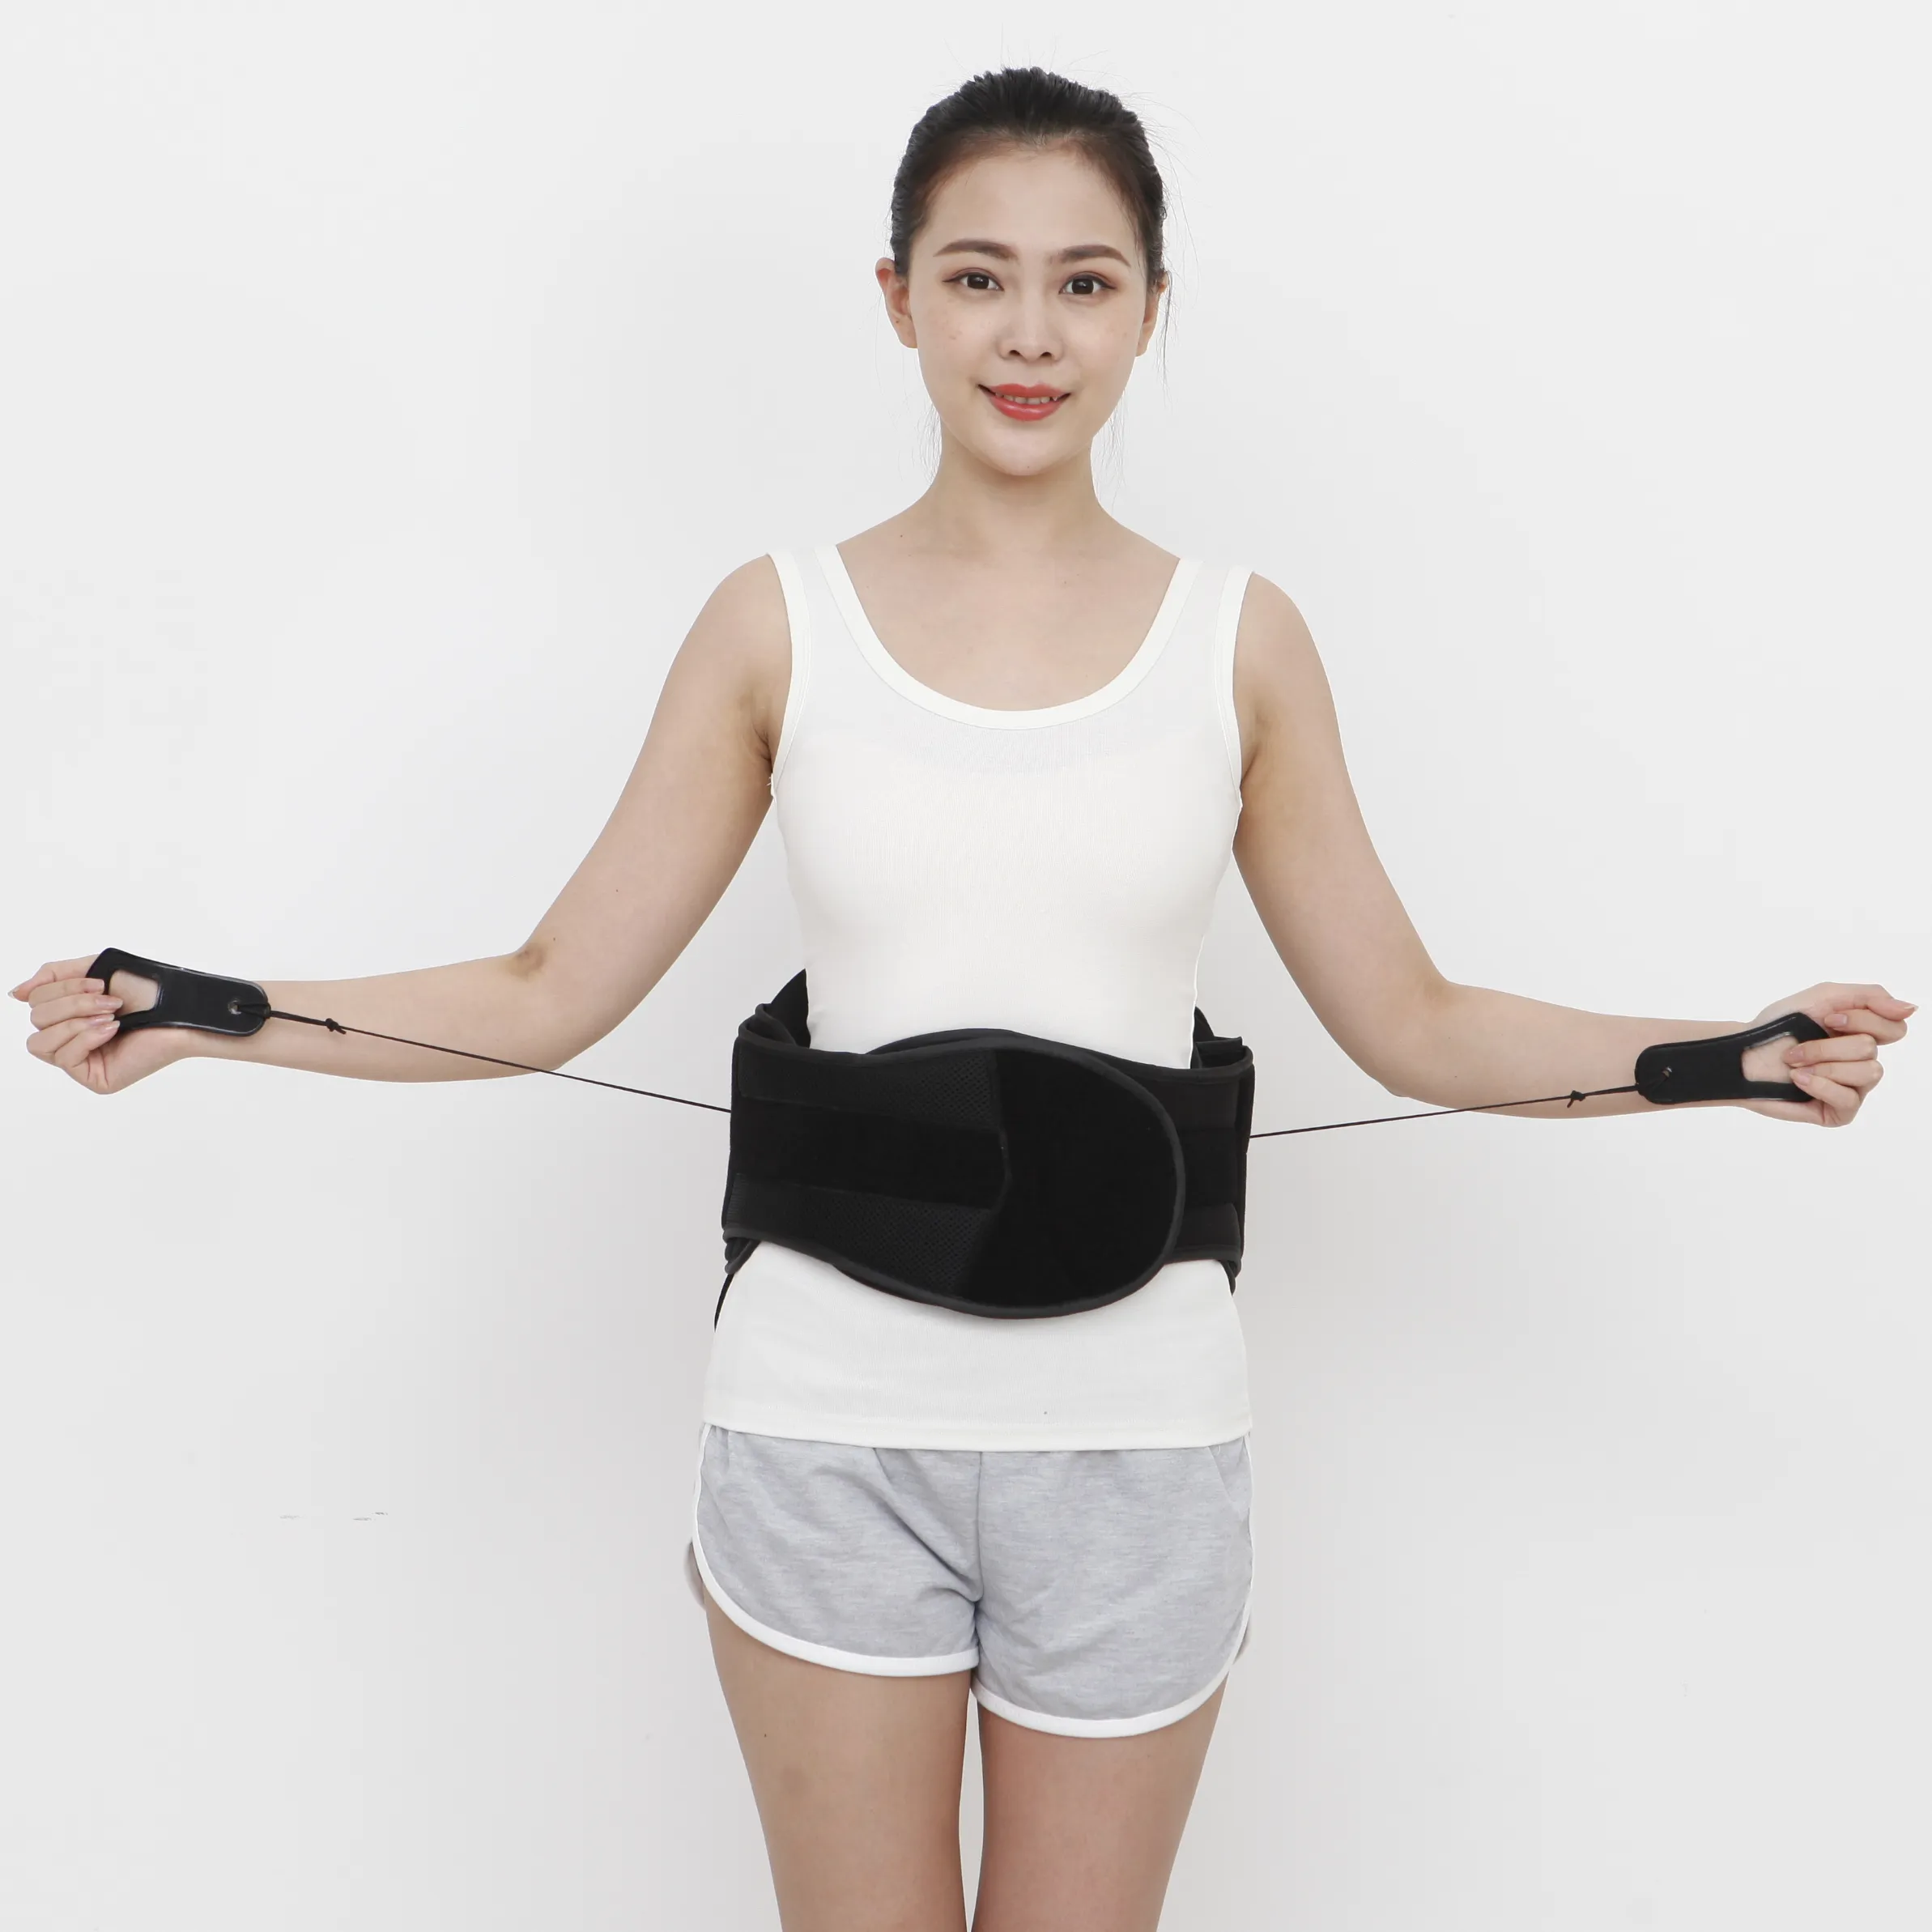 Back Brace for Women - Ultra Light & Breathable Fabric for Exercise - Adjustable Compression - Lower Back Belt Pain Relief